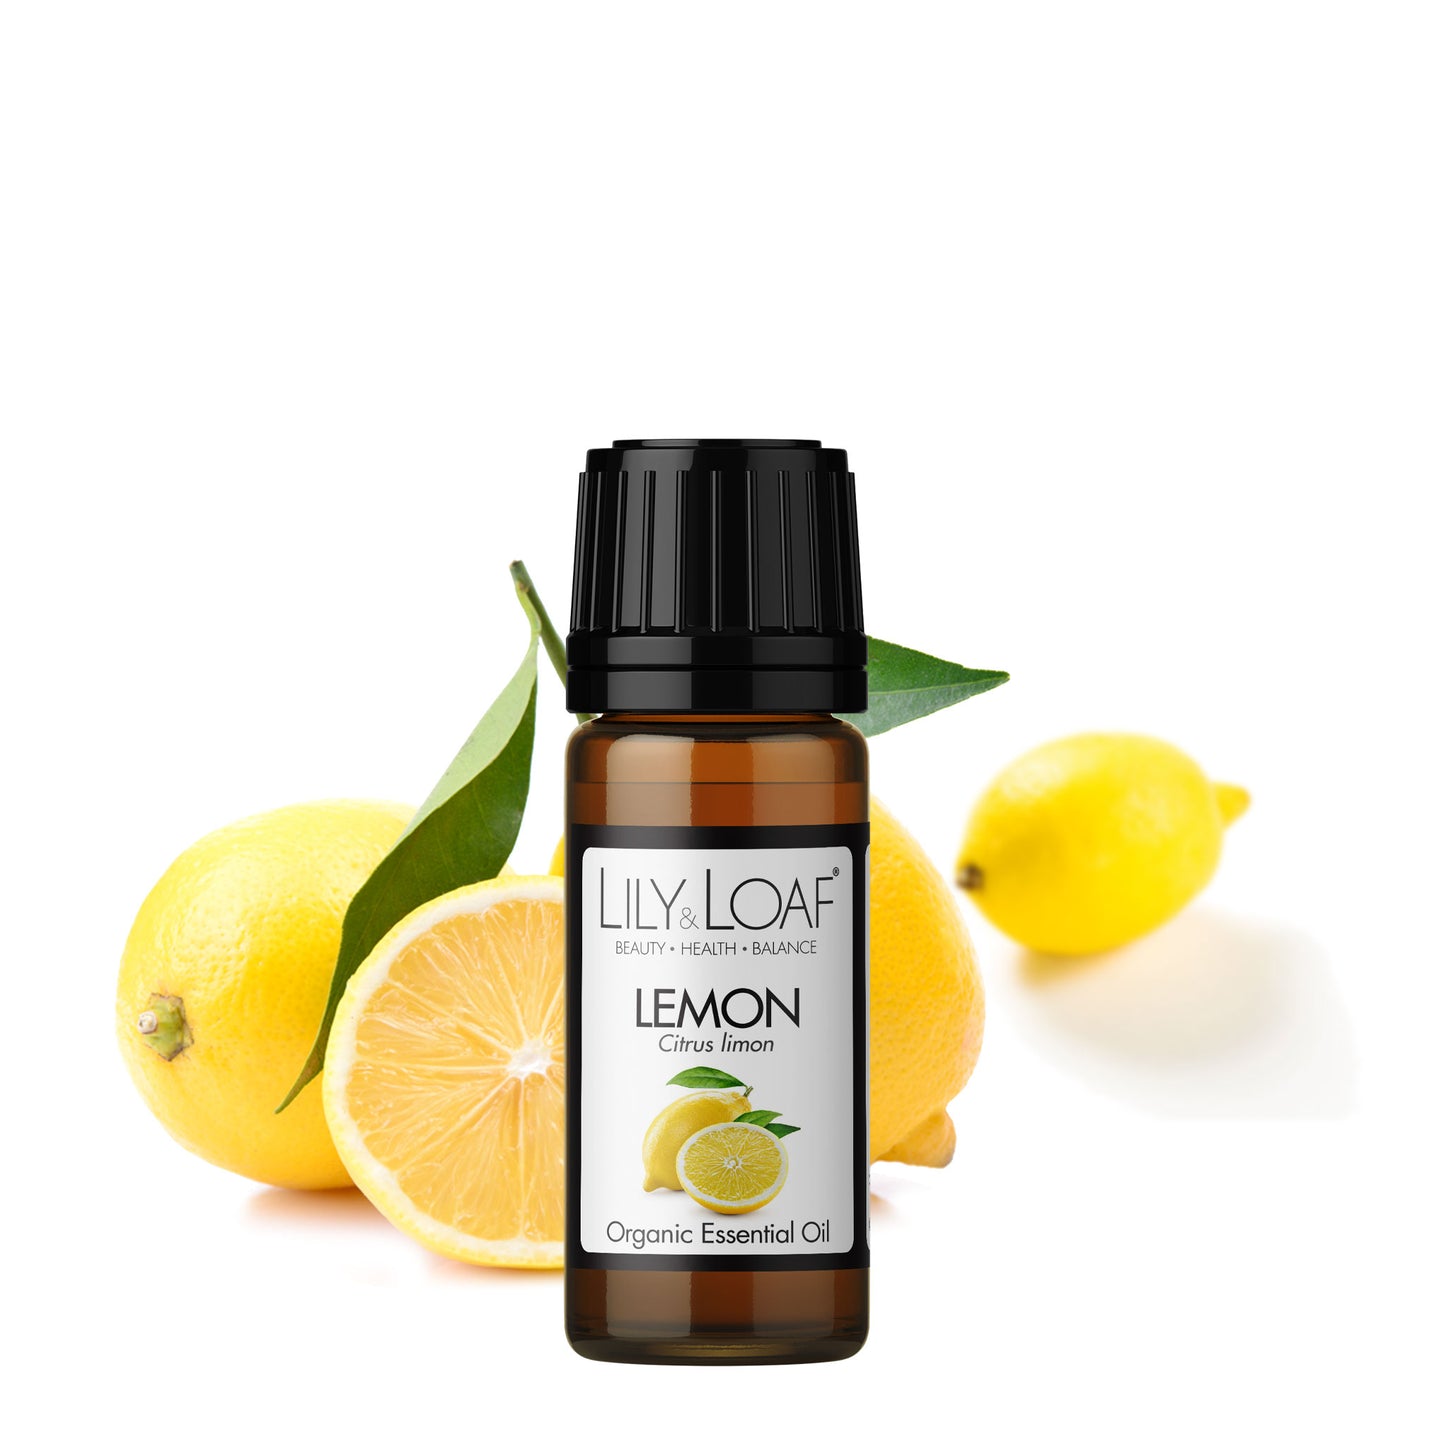 Lily and Loaf Lemon Organic Essential Oil mix with carrier oil for massage